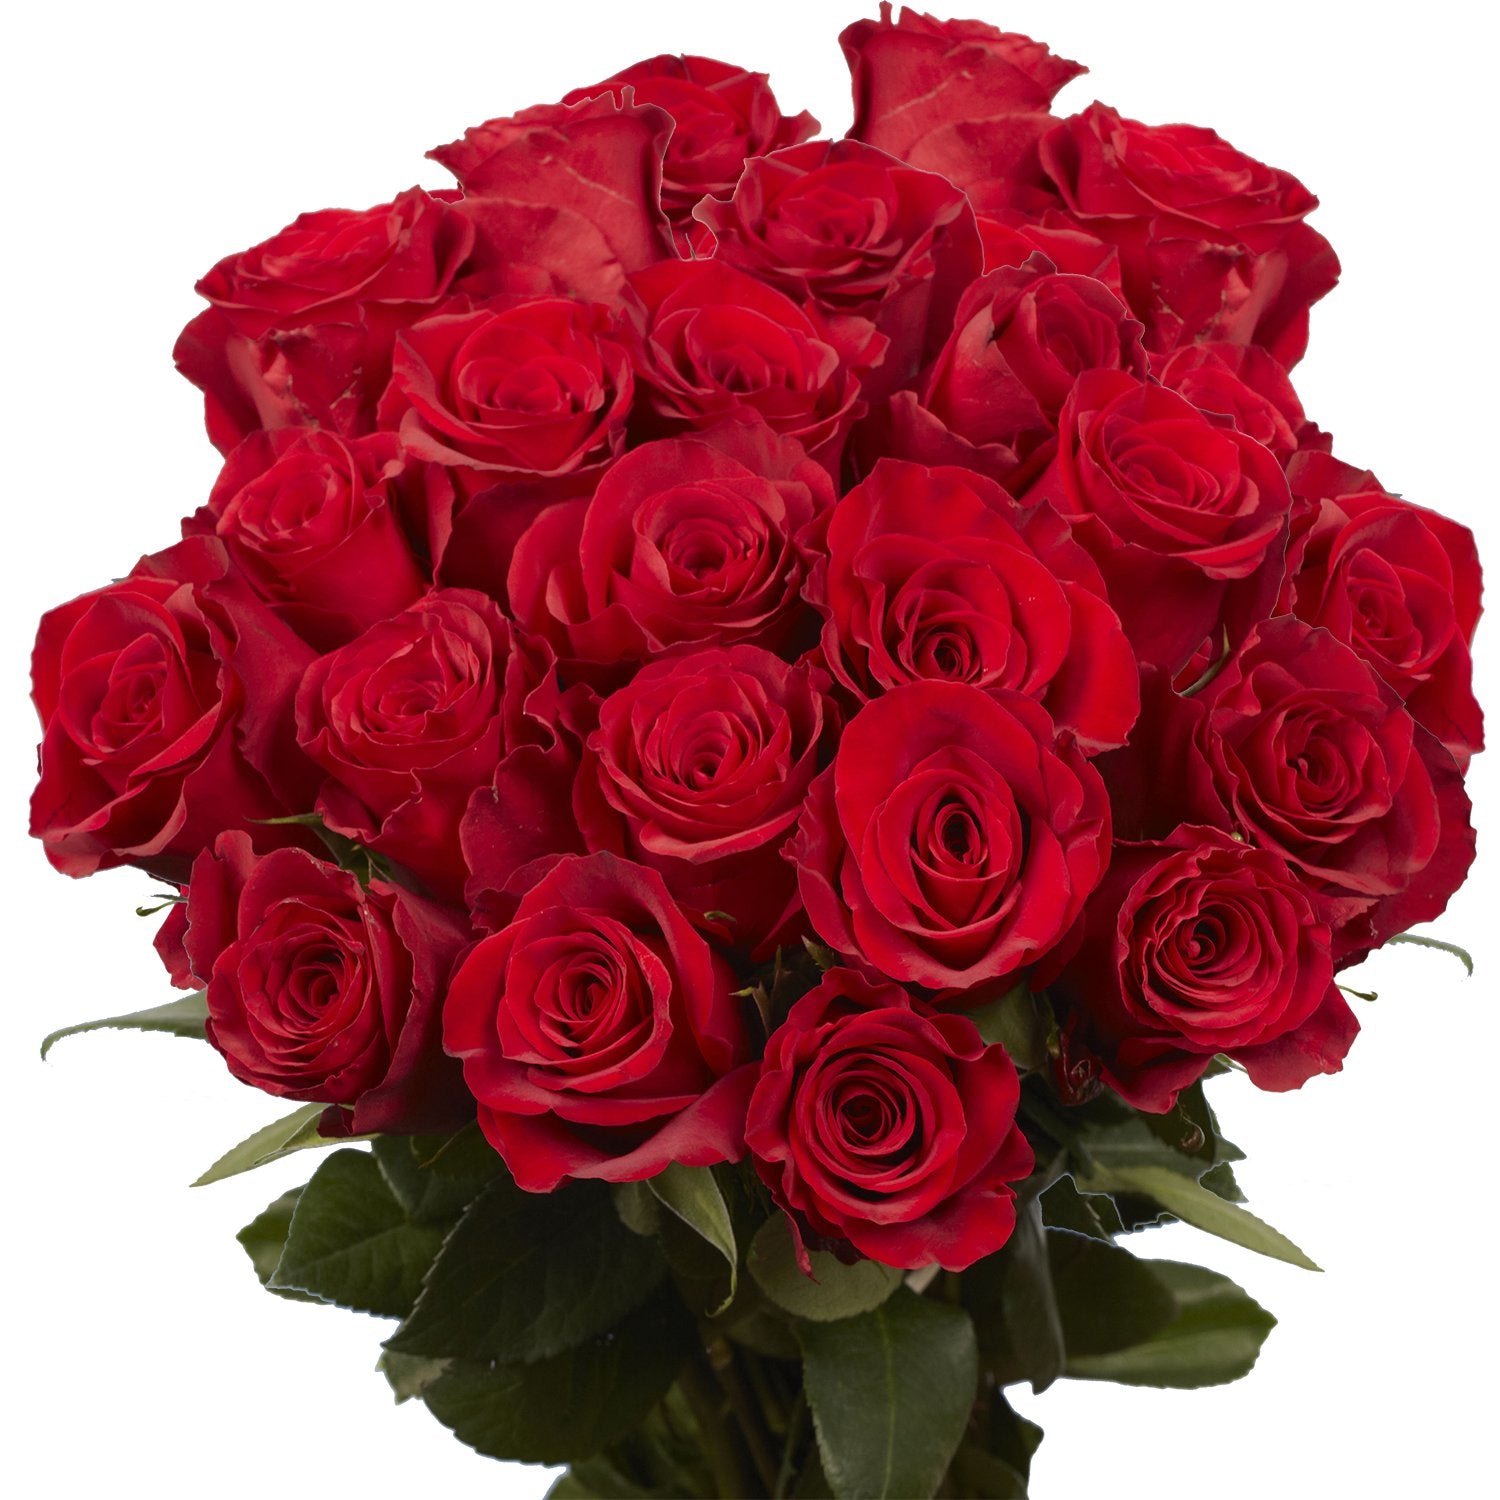 GlobalRose Red Roses- Express Flower Delivery- 50 Fresh Cut Stems ...